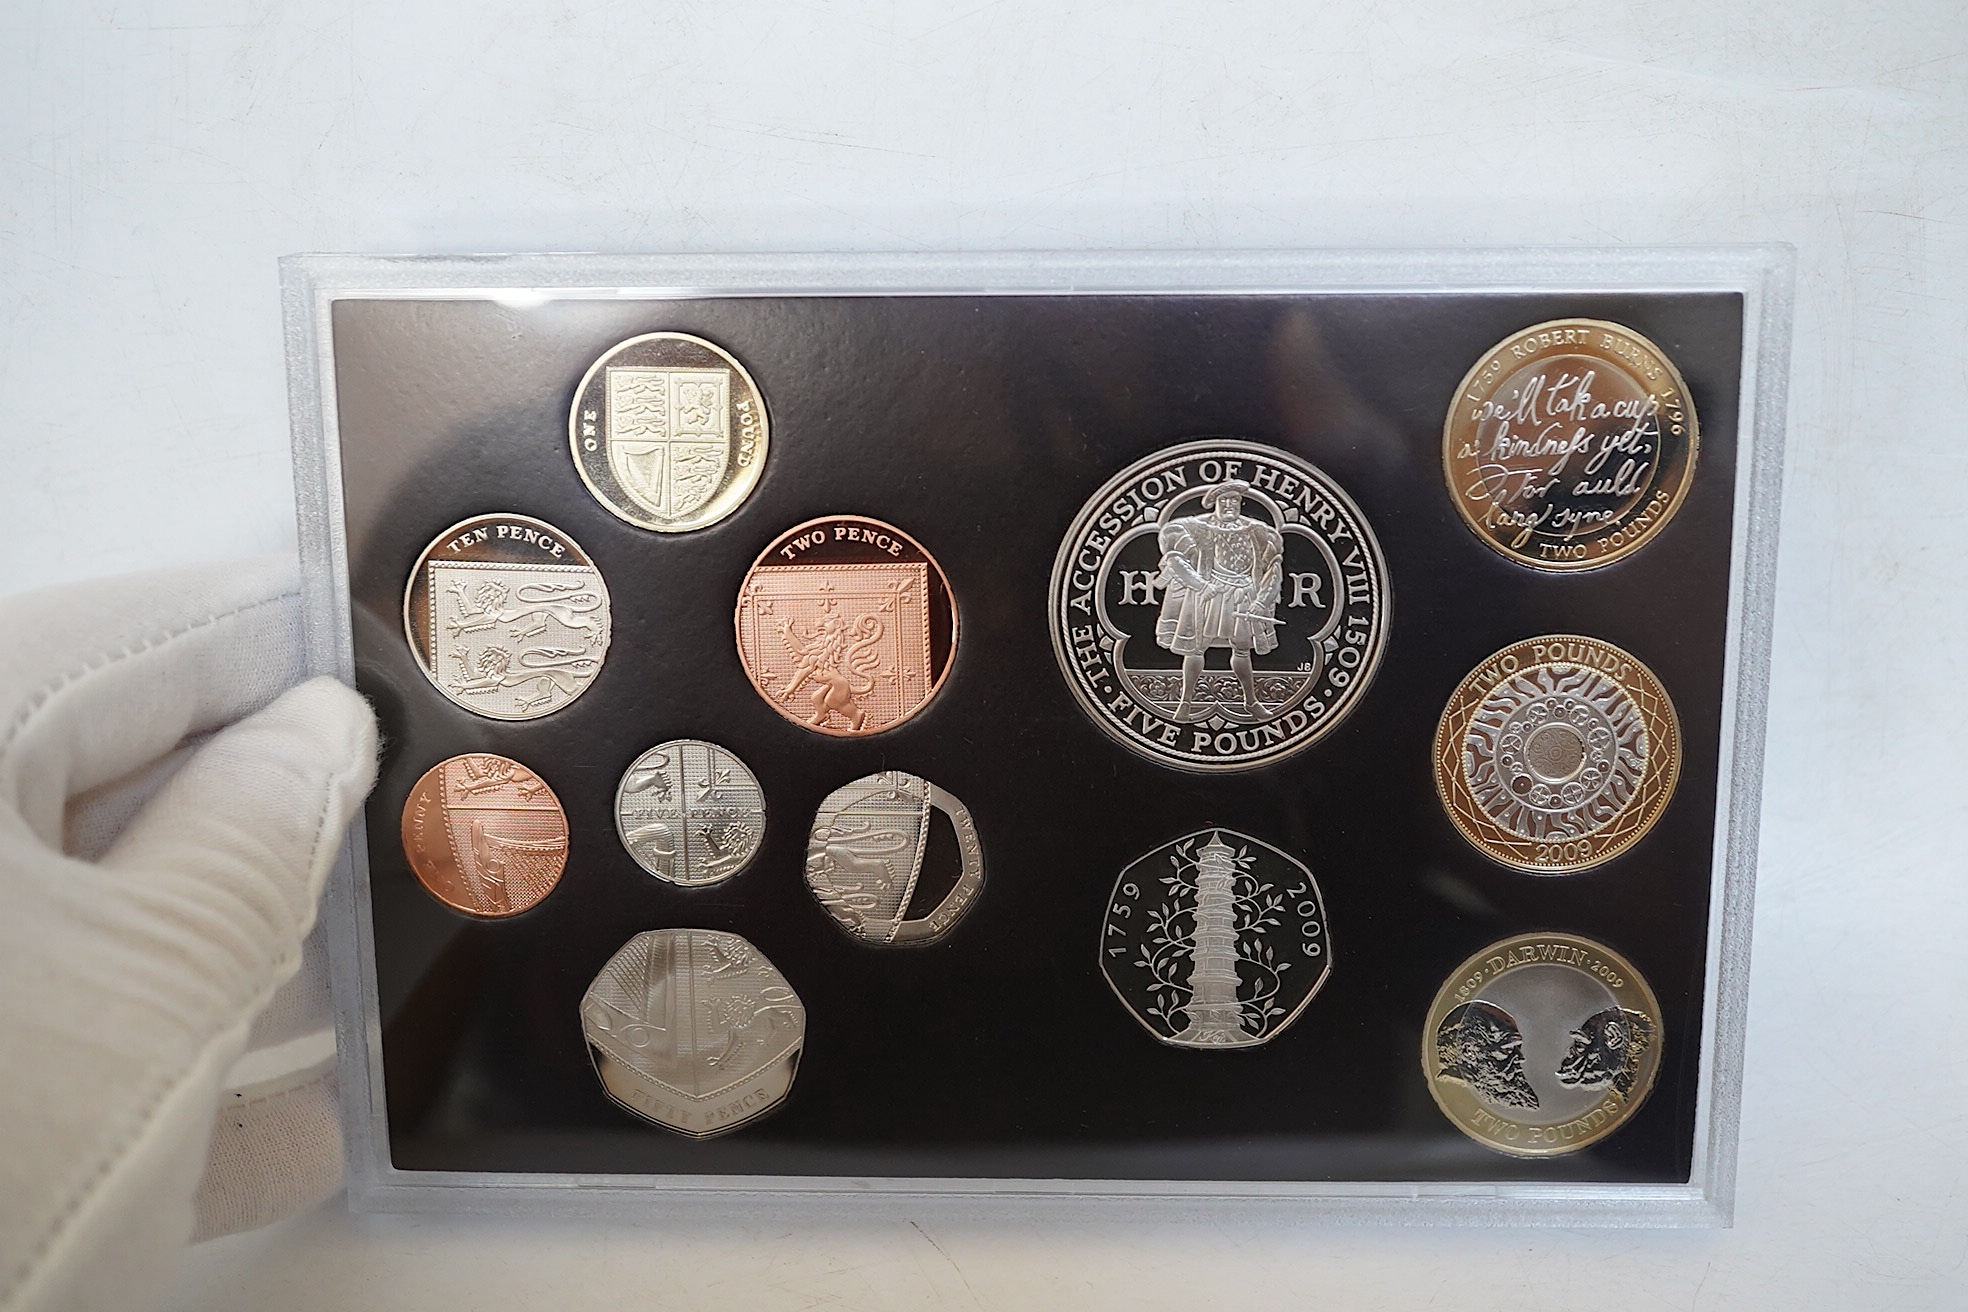 Elizabeth II proof coins, 2009 proof coin set, including the scarce Kew Gardens 50p